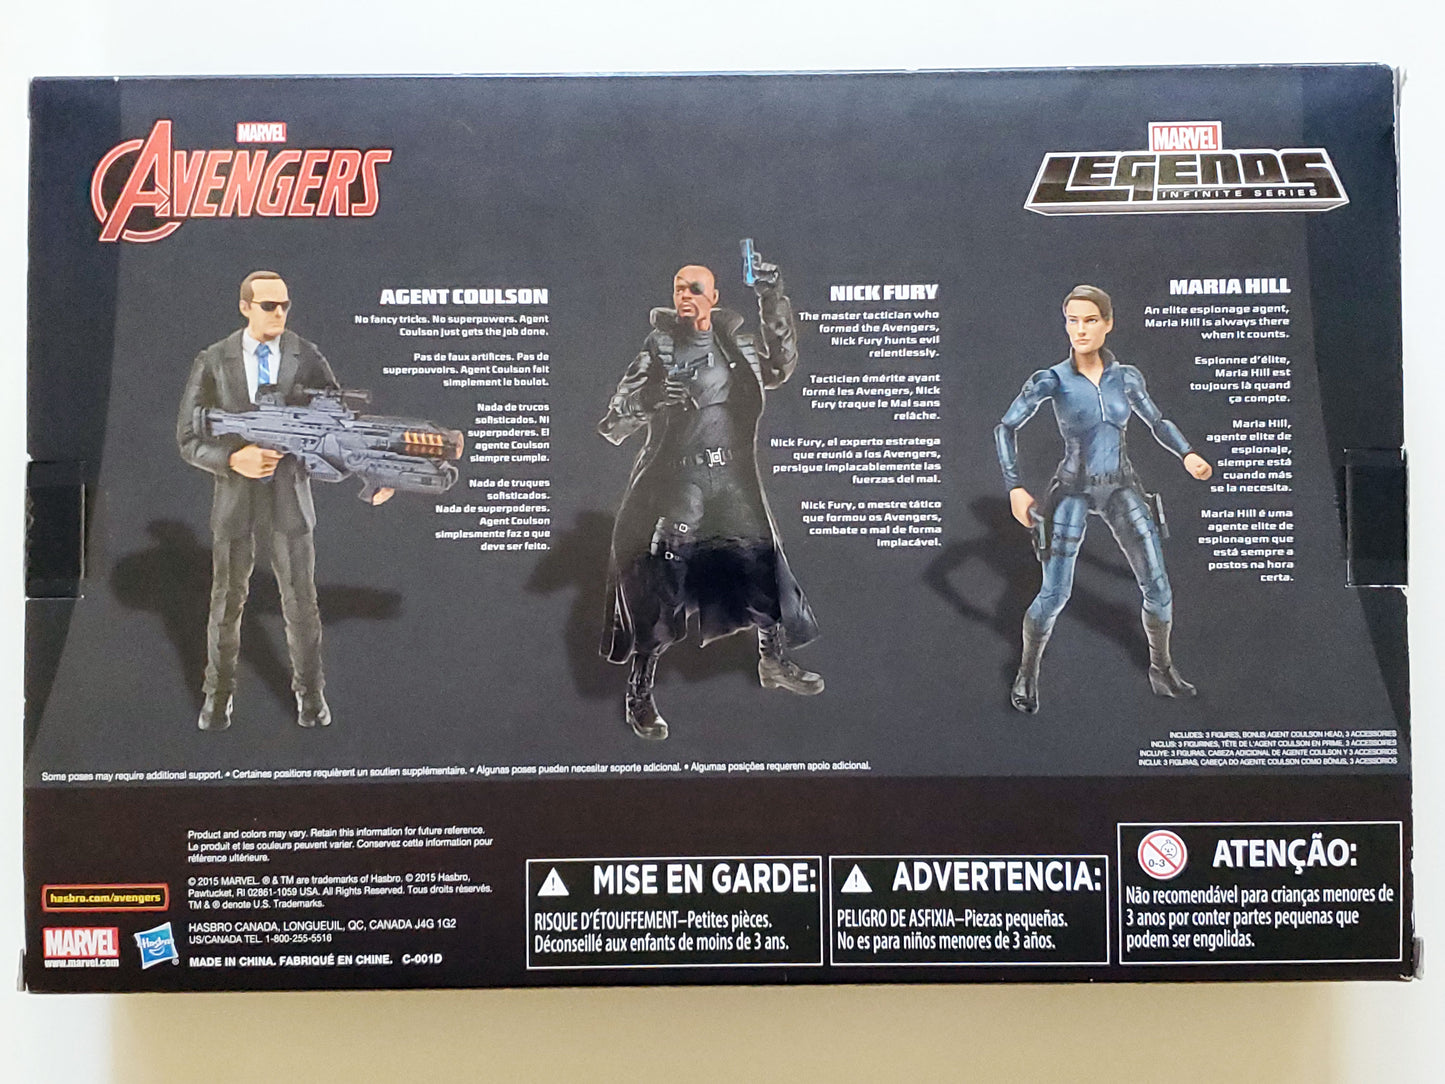 Marvel Legends Exclusive S.H.I.E.L.D. Action Figure 3-Pack (Agent Coulson, Nick Fury, Maria Hill)